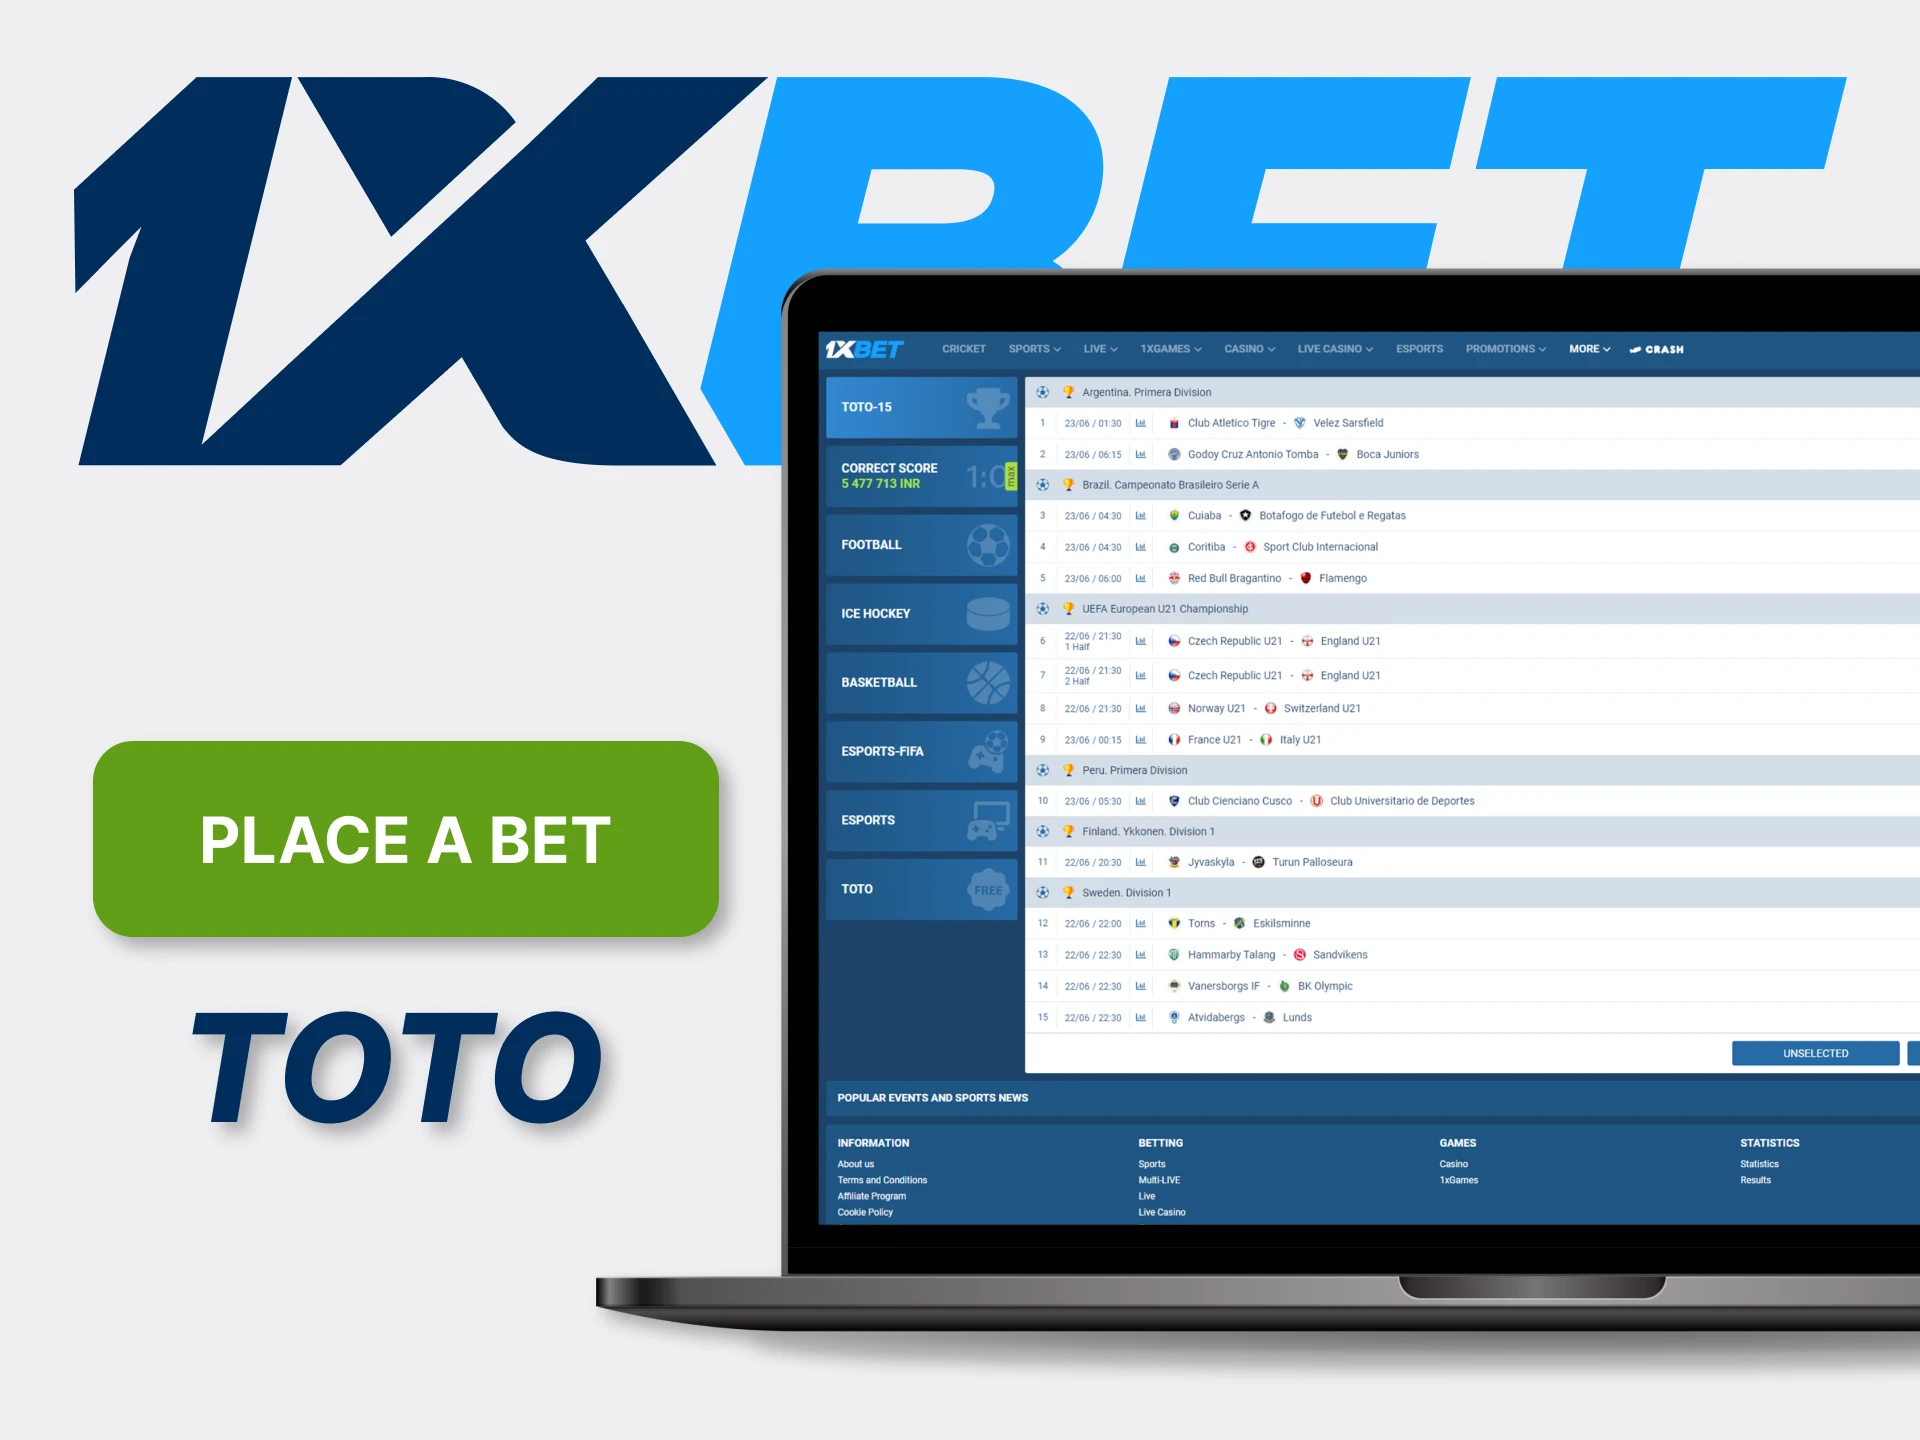 Learn how easy it is to bet on TOTO at 1xBet with these instructions.